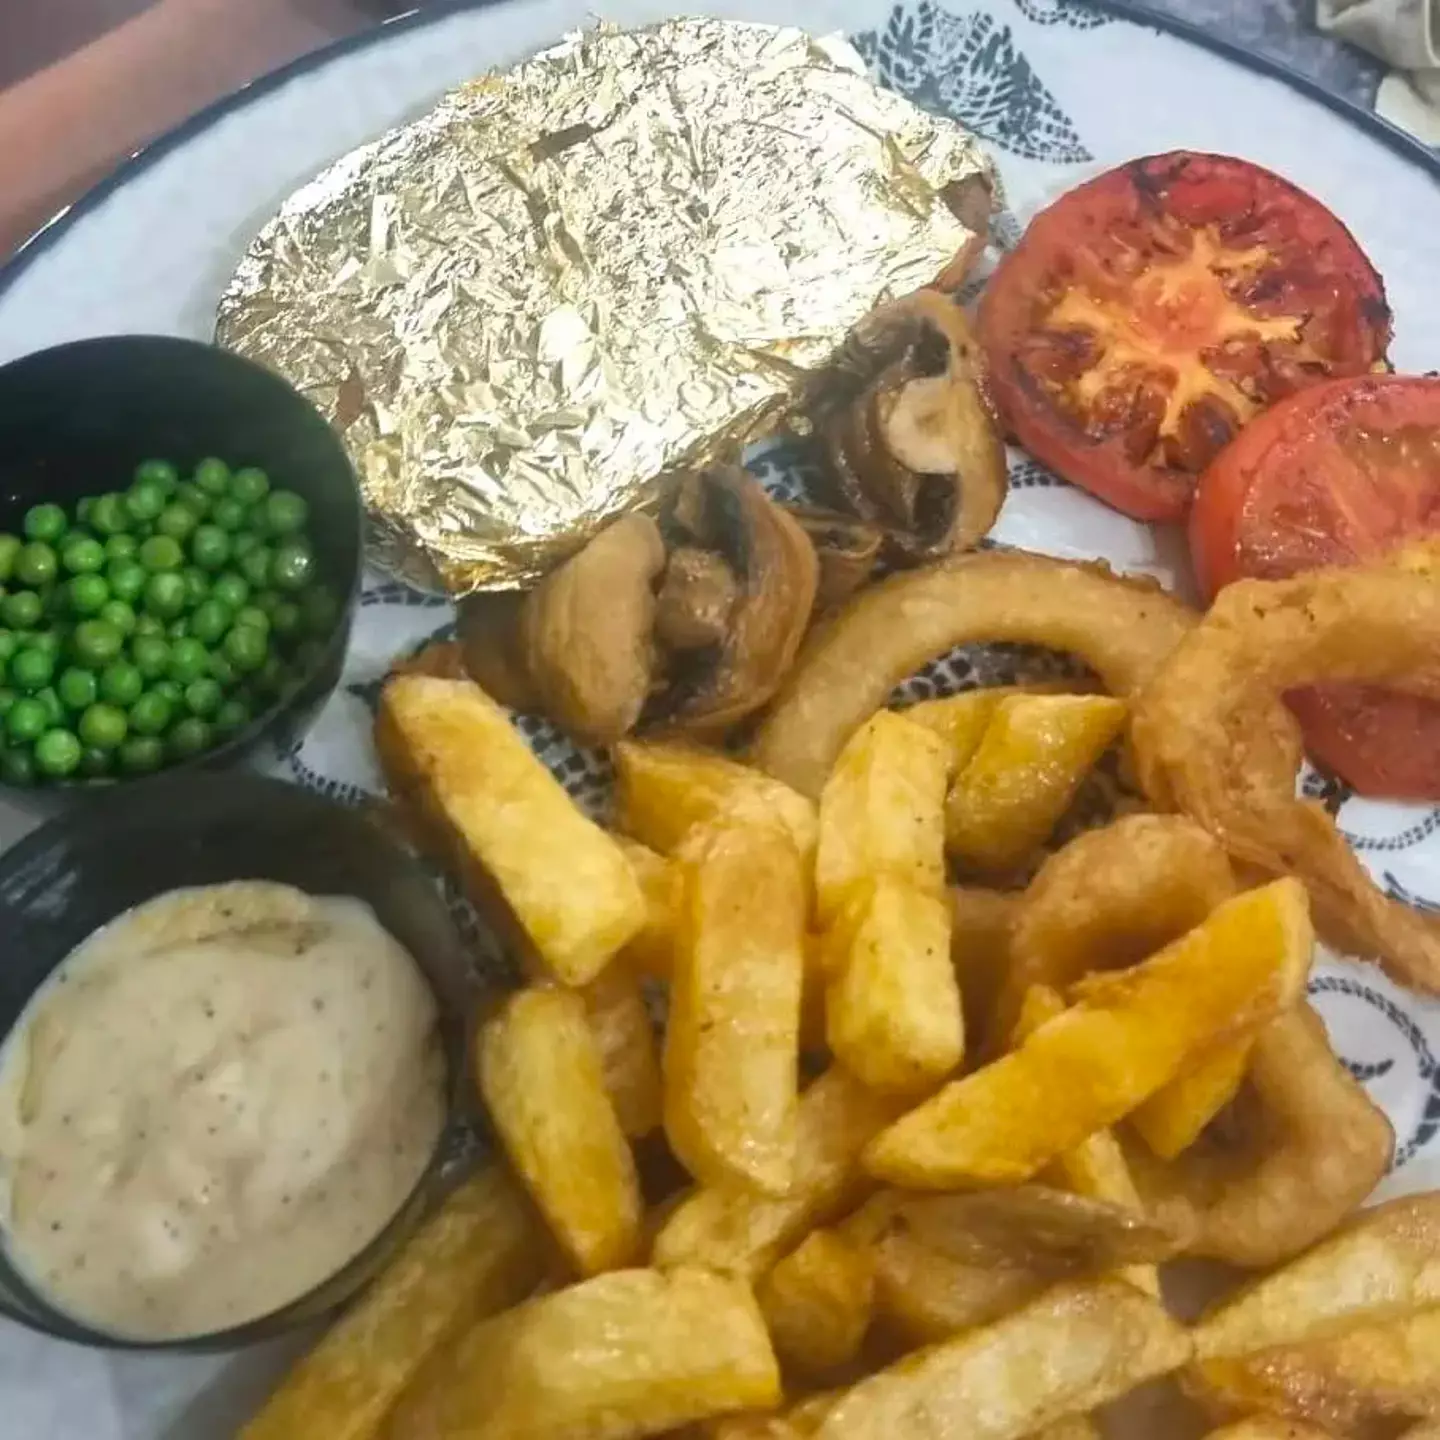 Big Ben Bistro offers a gold-covered steak for £135, according to The Sun.